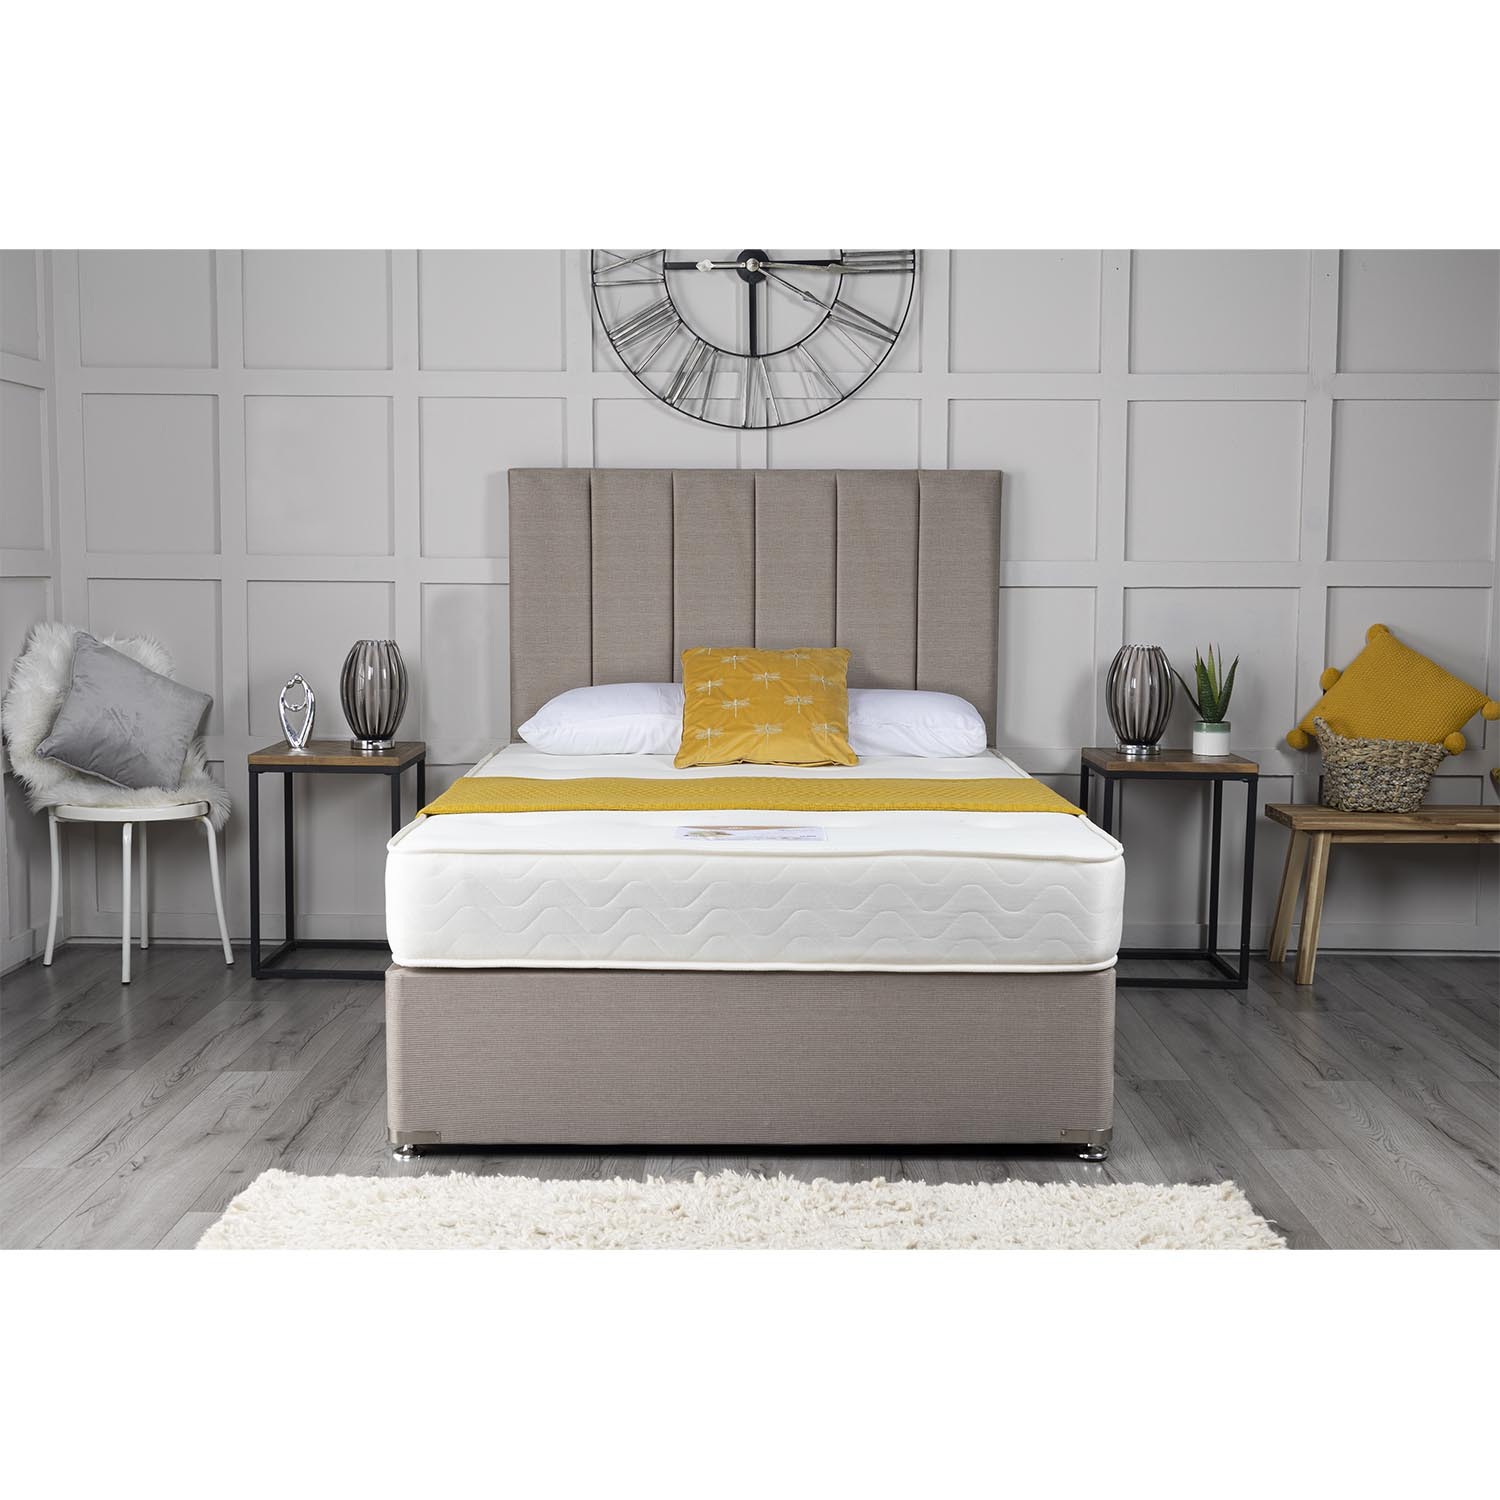 Dura Beds Double White Special Memory Mattress Image 2